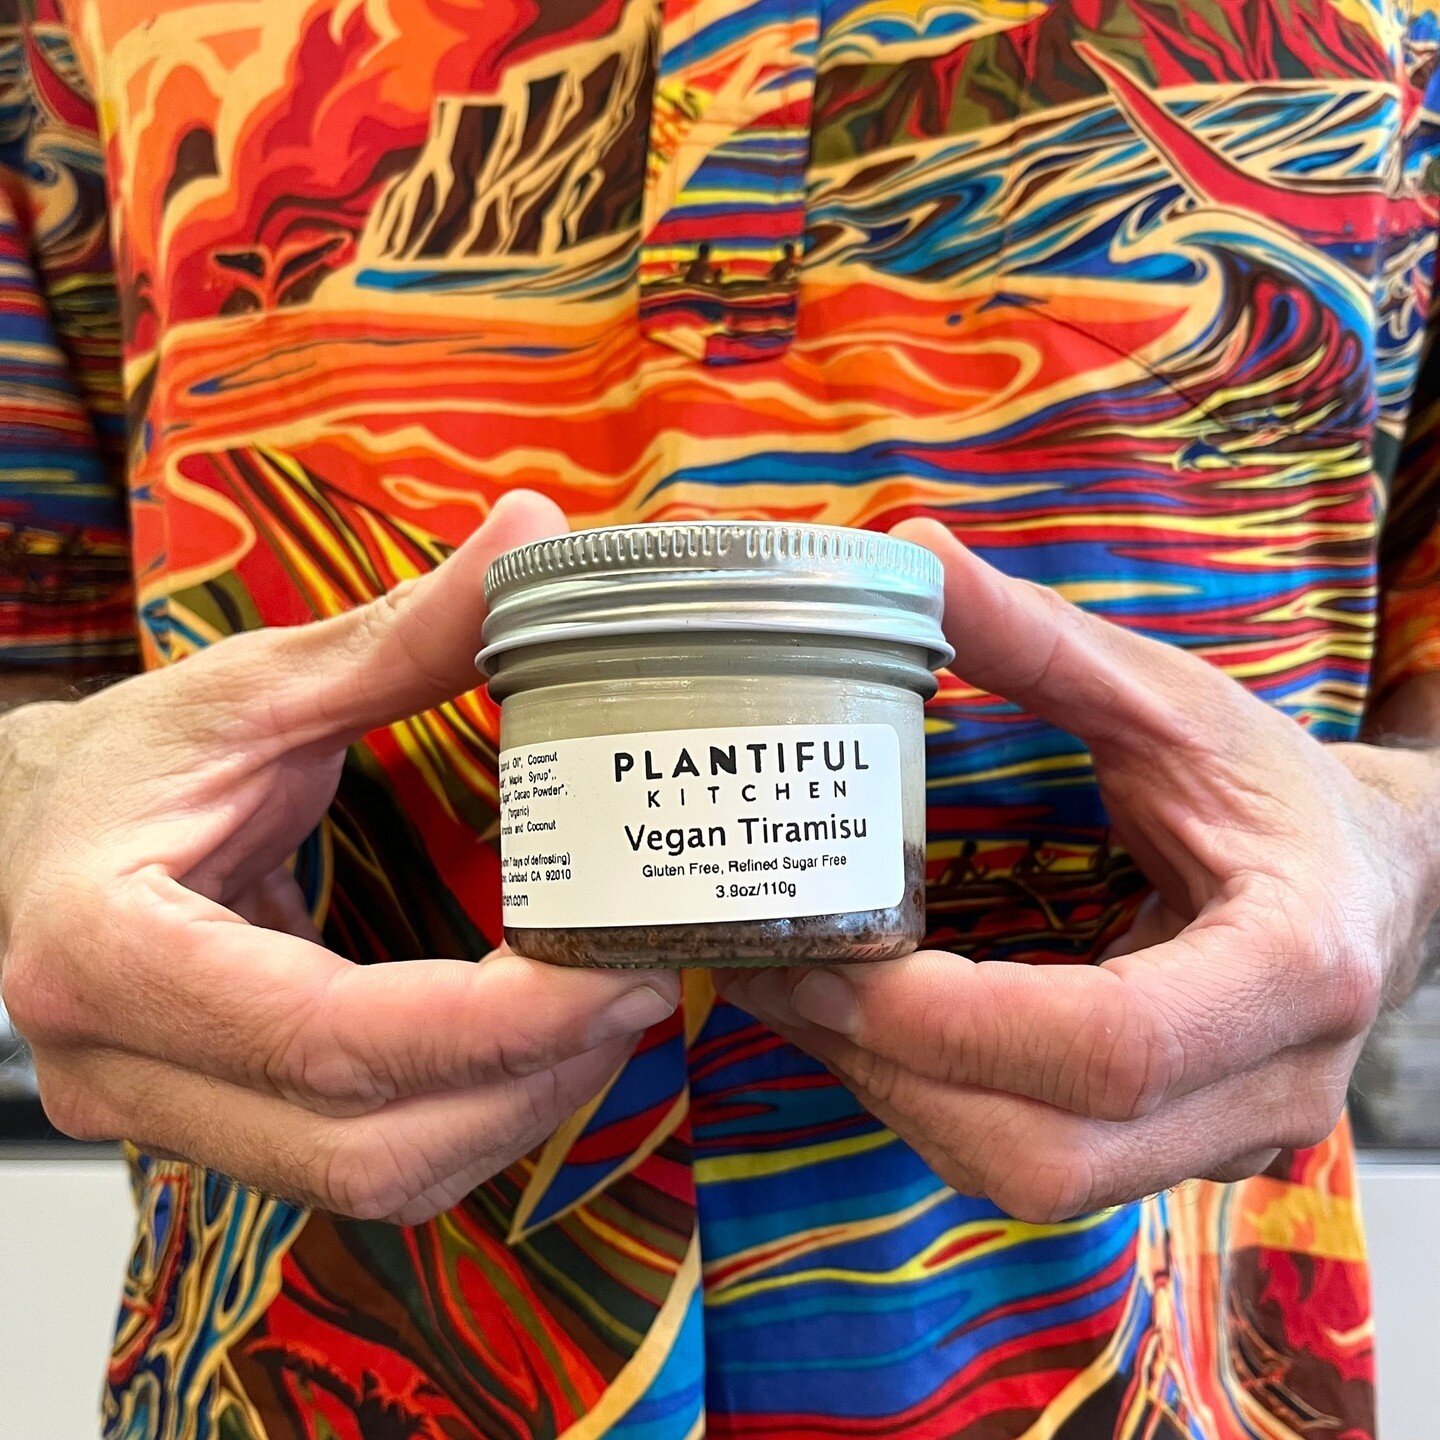 ✨️Staff Favorite✨️ Jason loves the Vegan Tiramisu from Plantiful Kitchen!⁠
⁠
🌿Plantiful Kitchen's goods are made from scratch right in Carlsbad, CA. Plus, these treats are 100% plant-based, gluten-free, dairy-free, soy-free, seed-oil free and contai